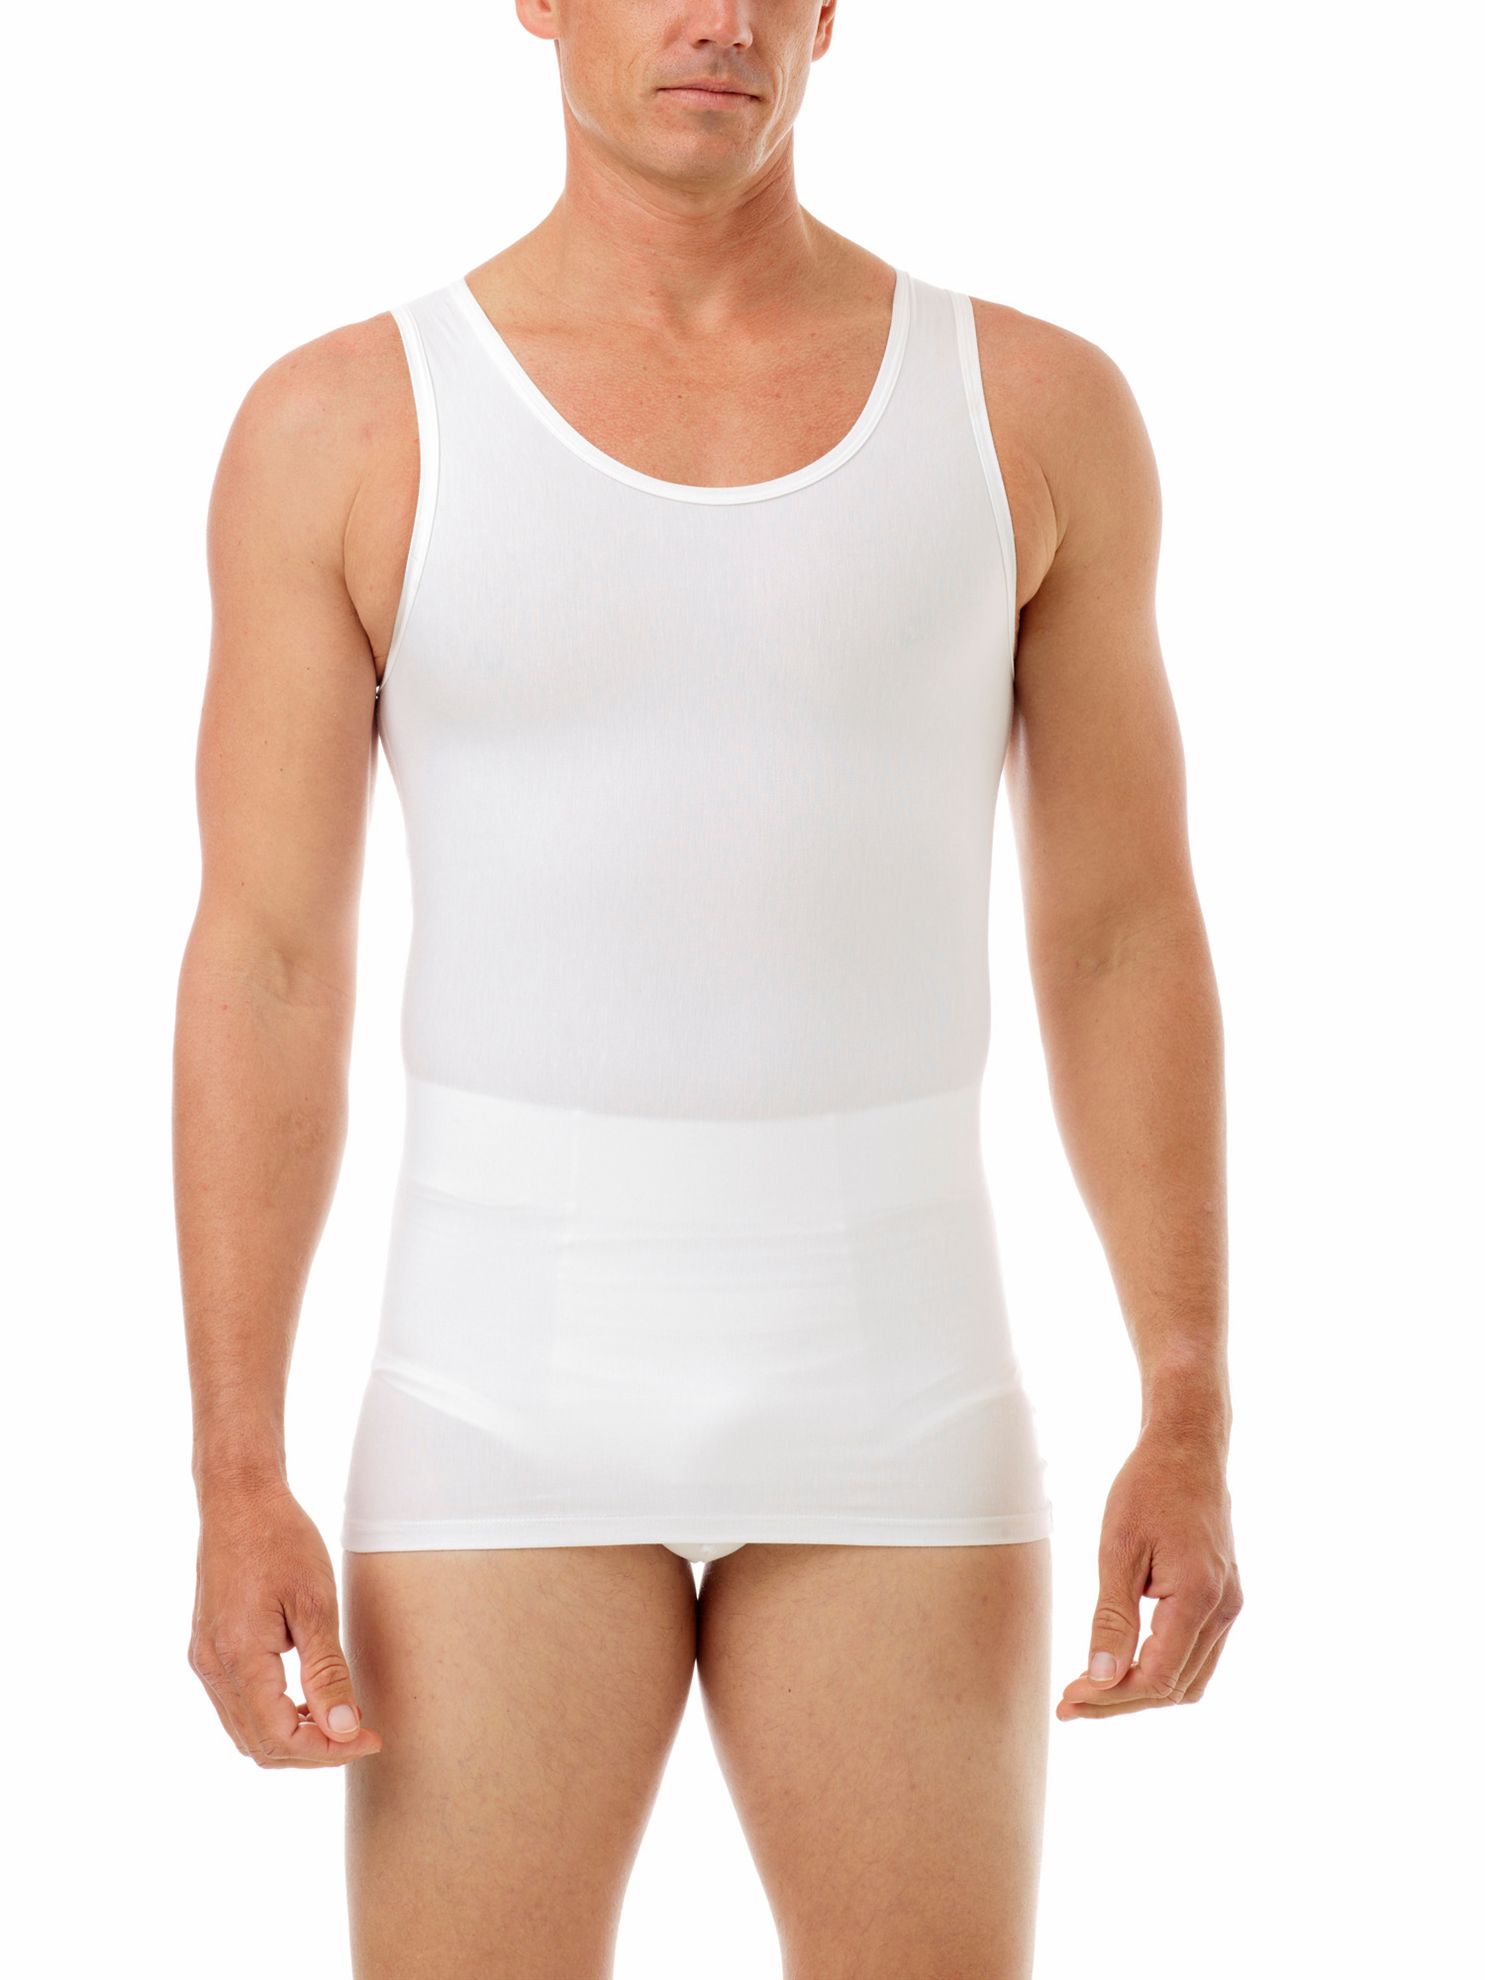 https://www.underworks.com/images/thumbs/0000361_mens-magicotton-compression-tank.jpeg